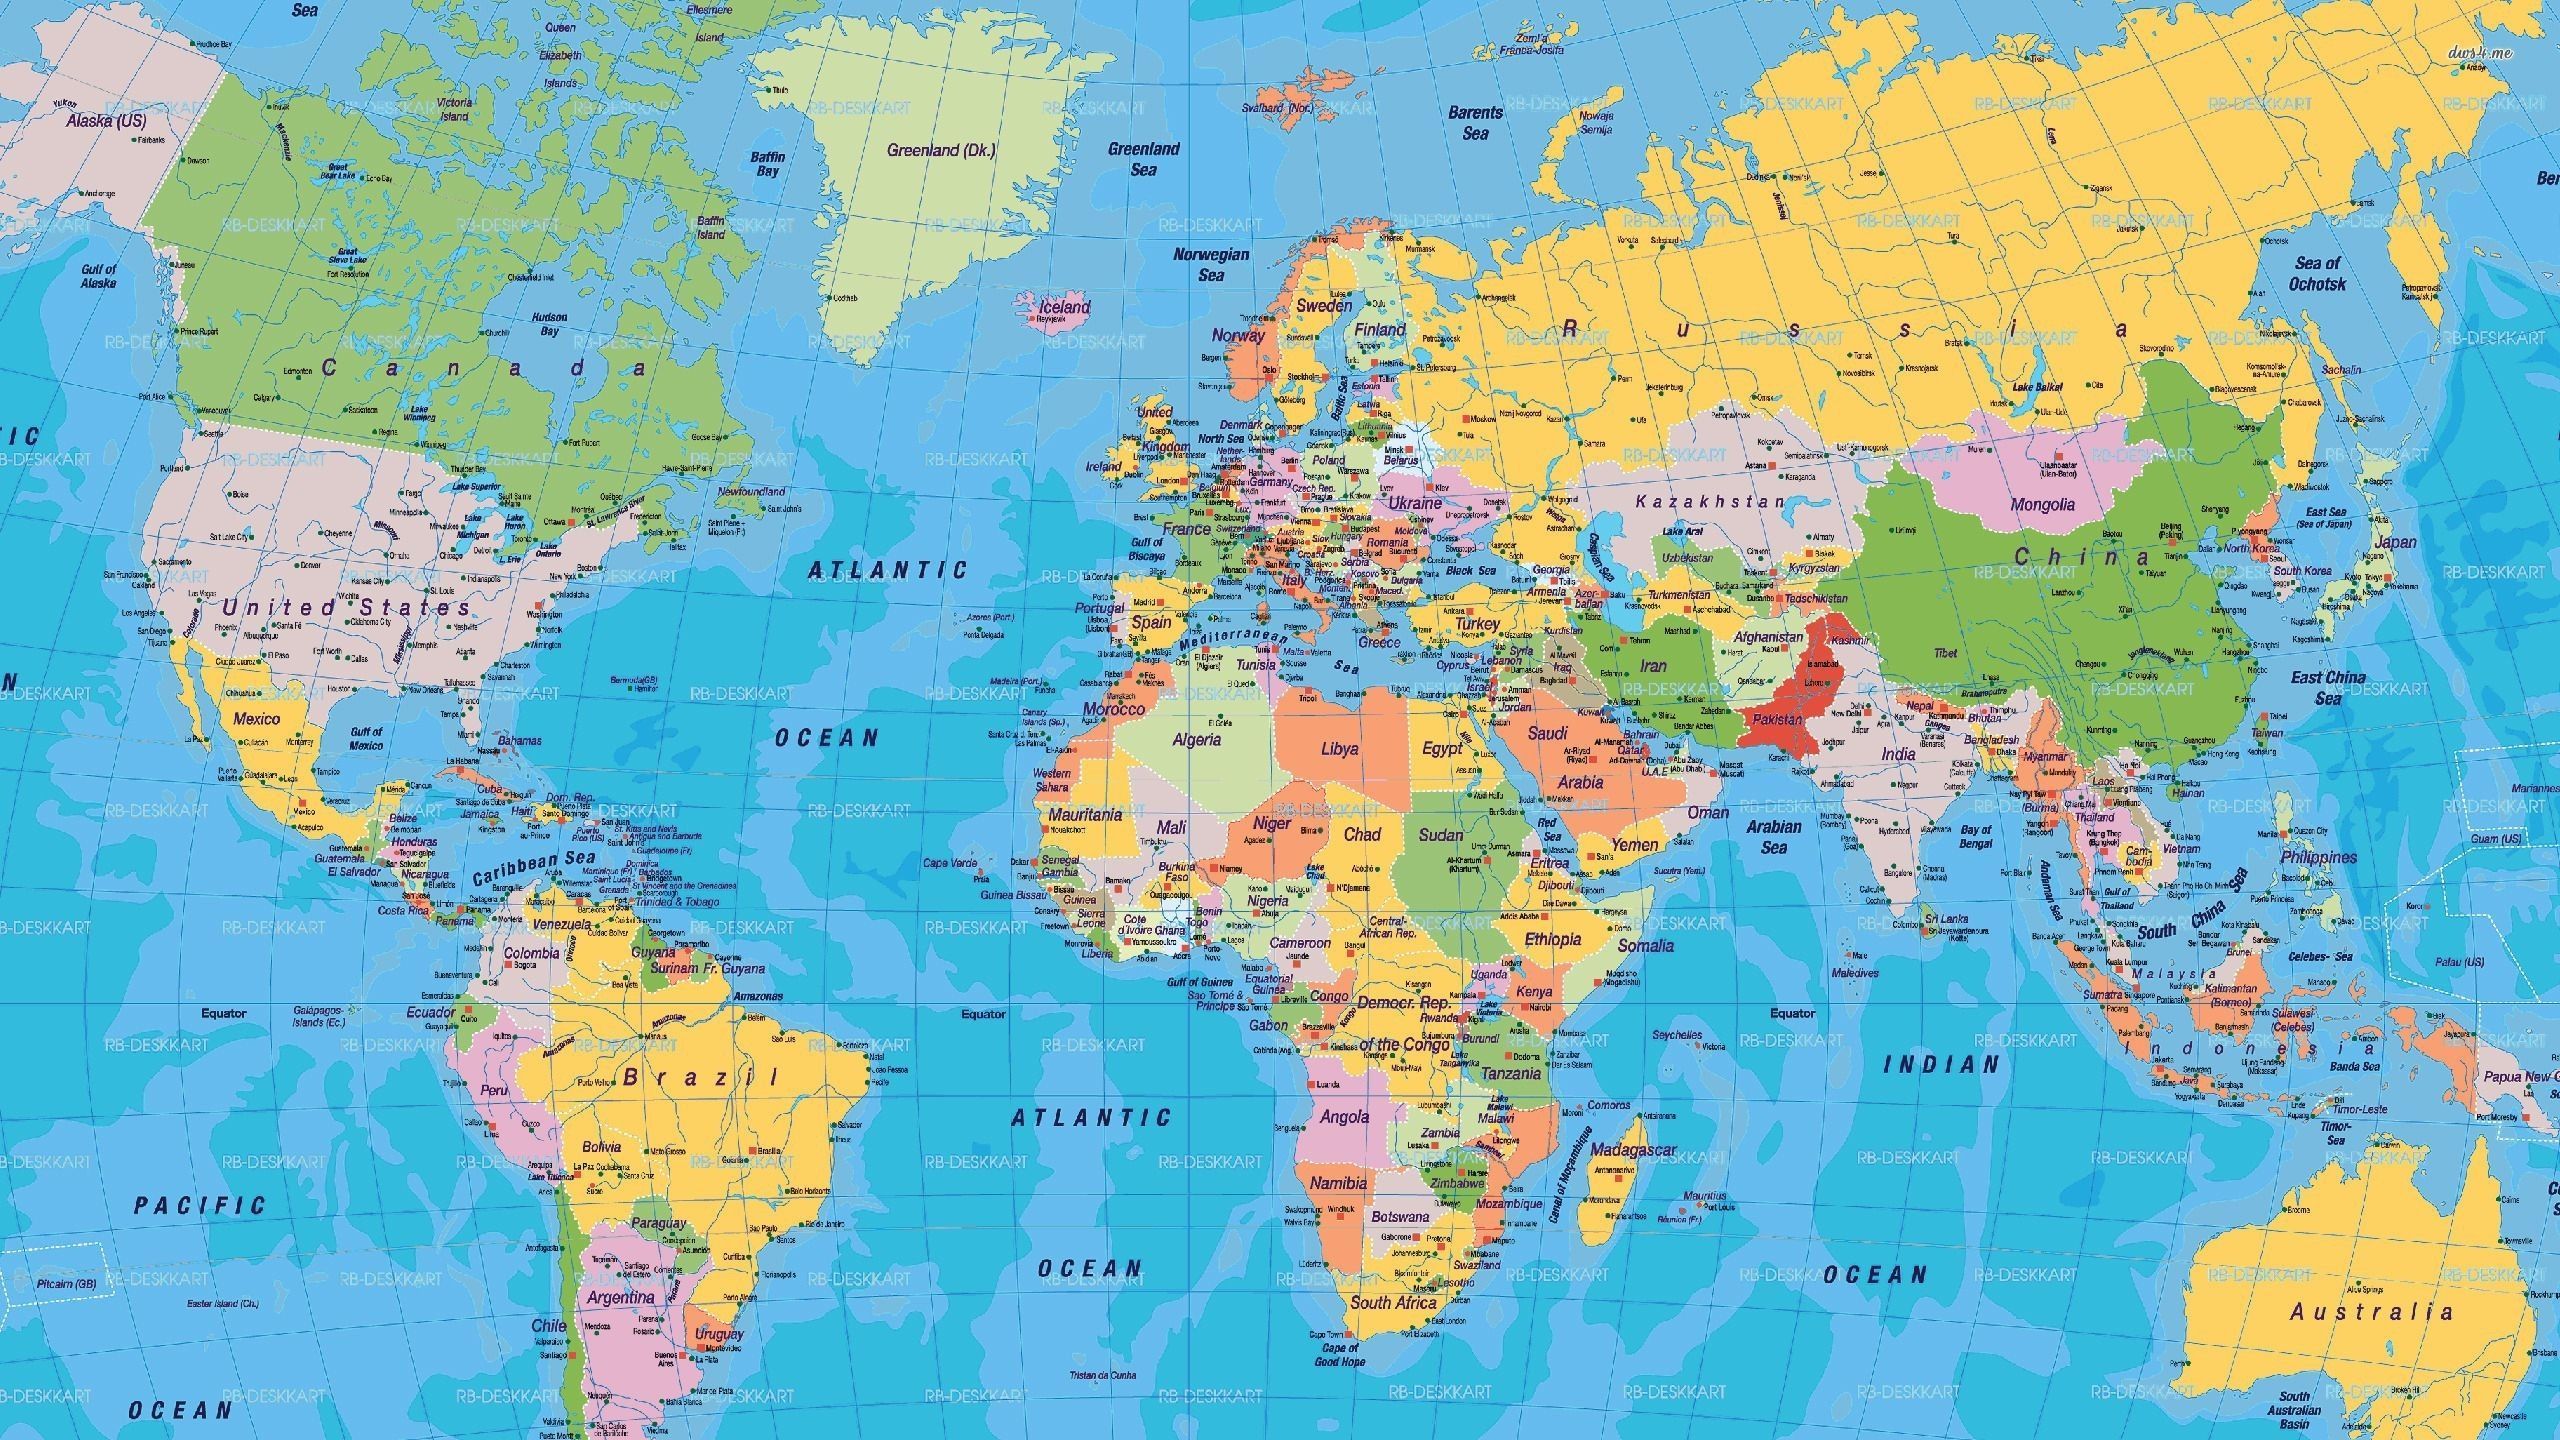 Latest World Map Computer Wallpaper FULL HD 1080p For PC Background. World map printable, World map wallpaper, World map picture